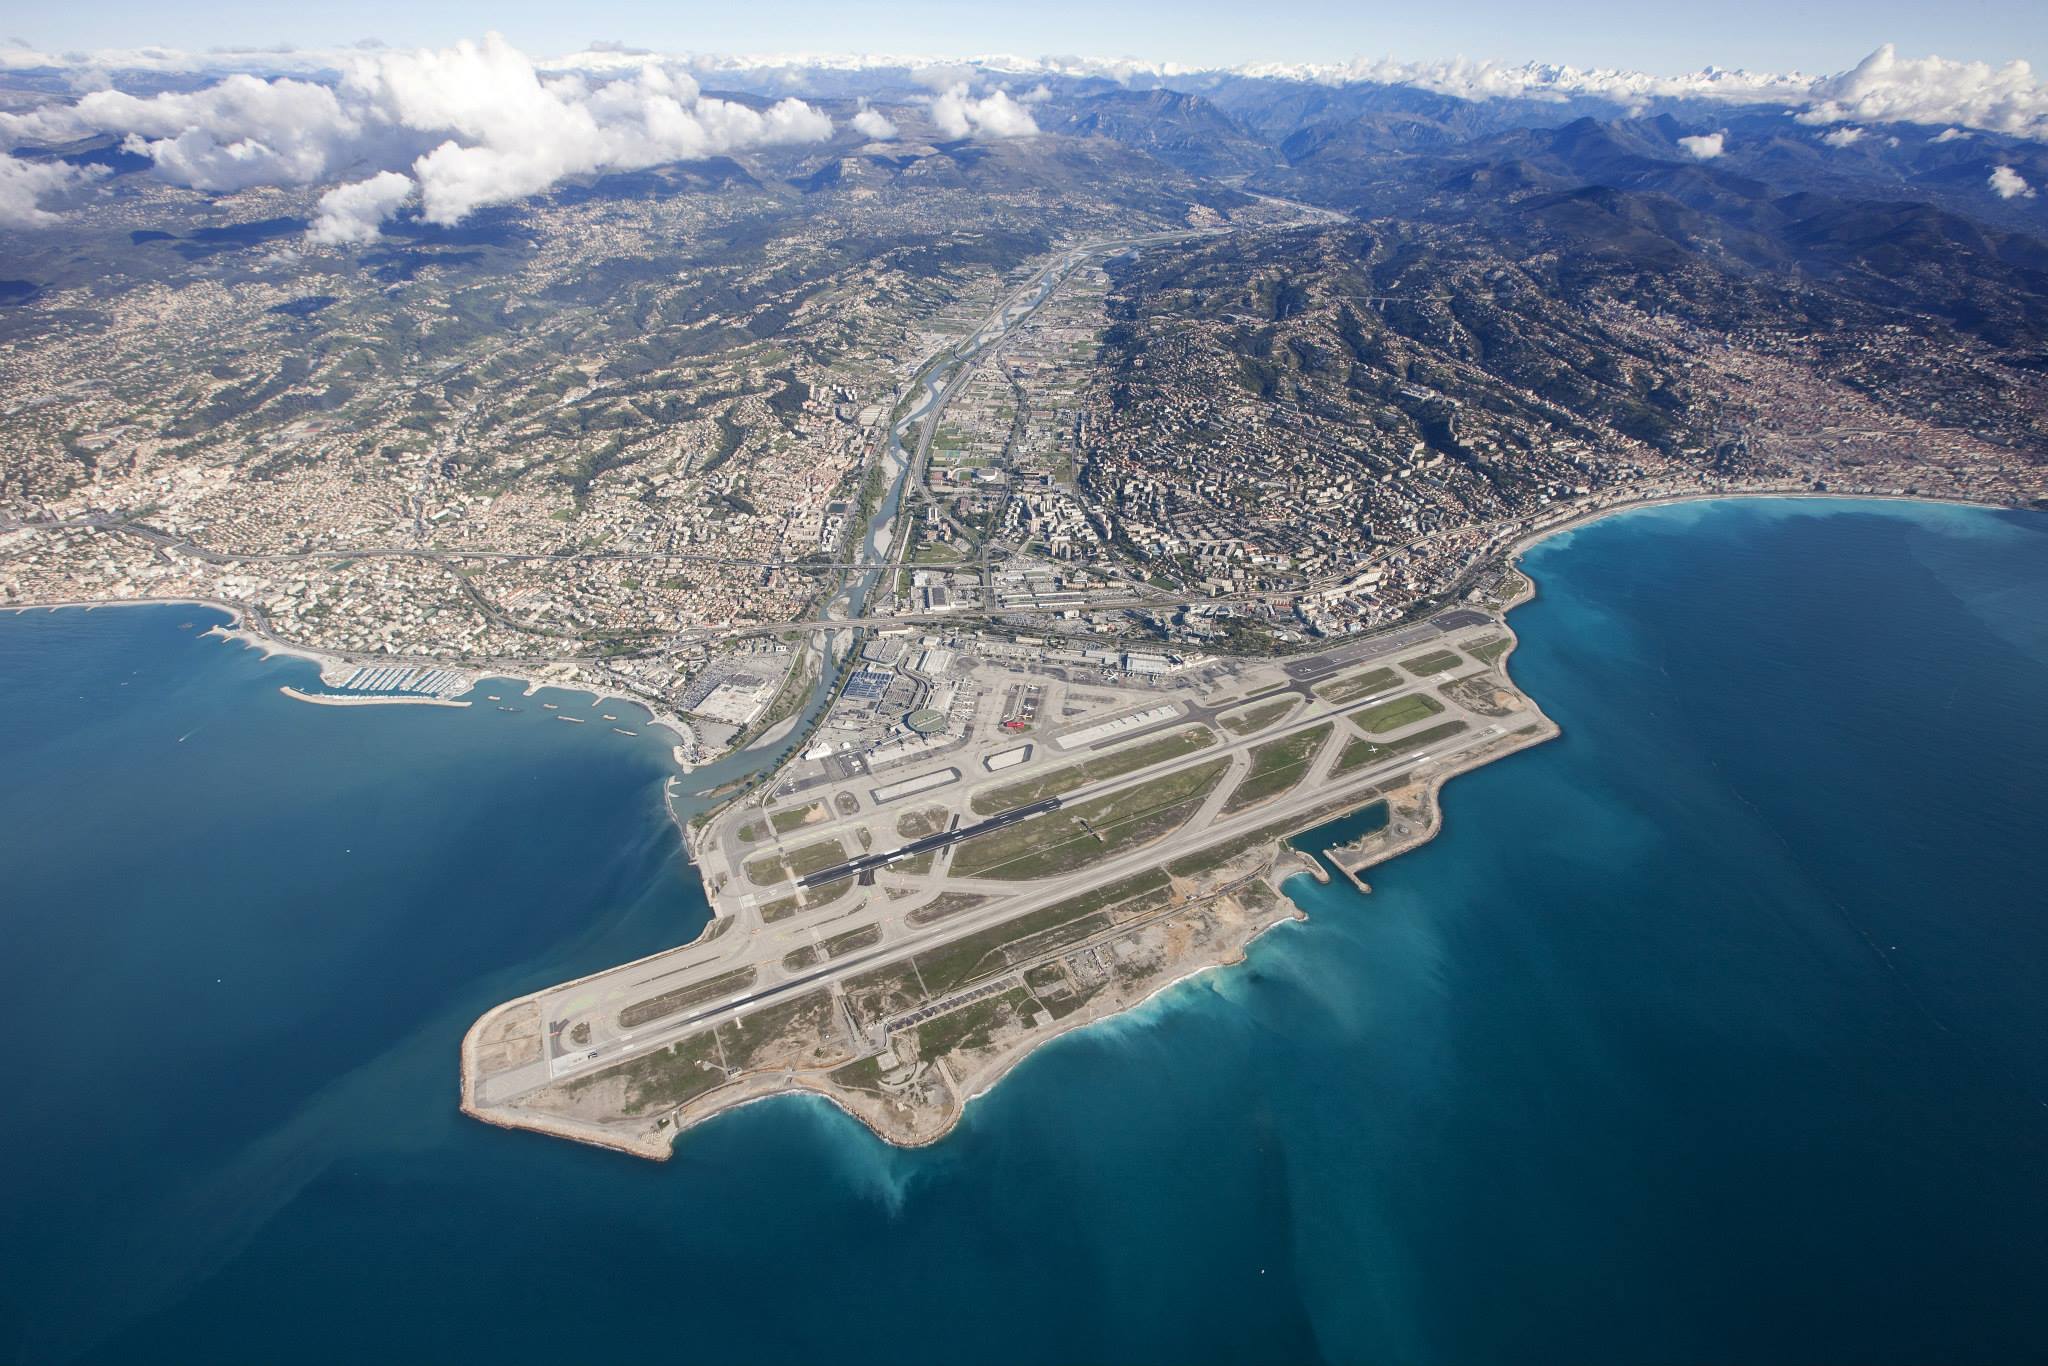 travel from nice airport to toulon